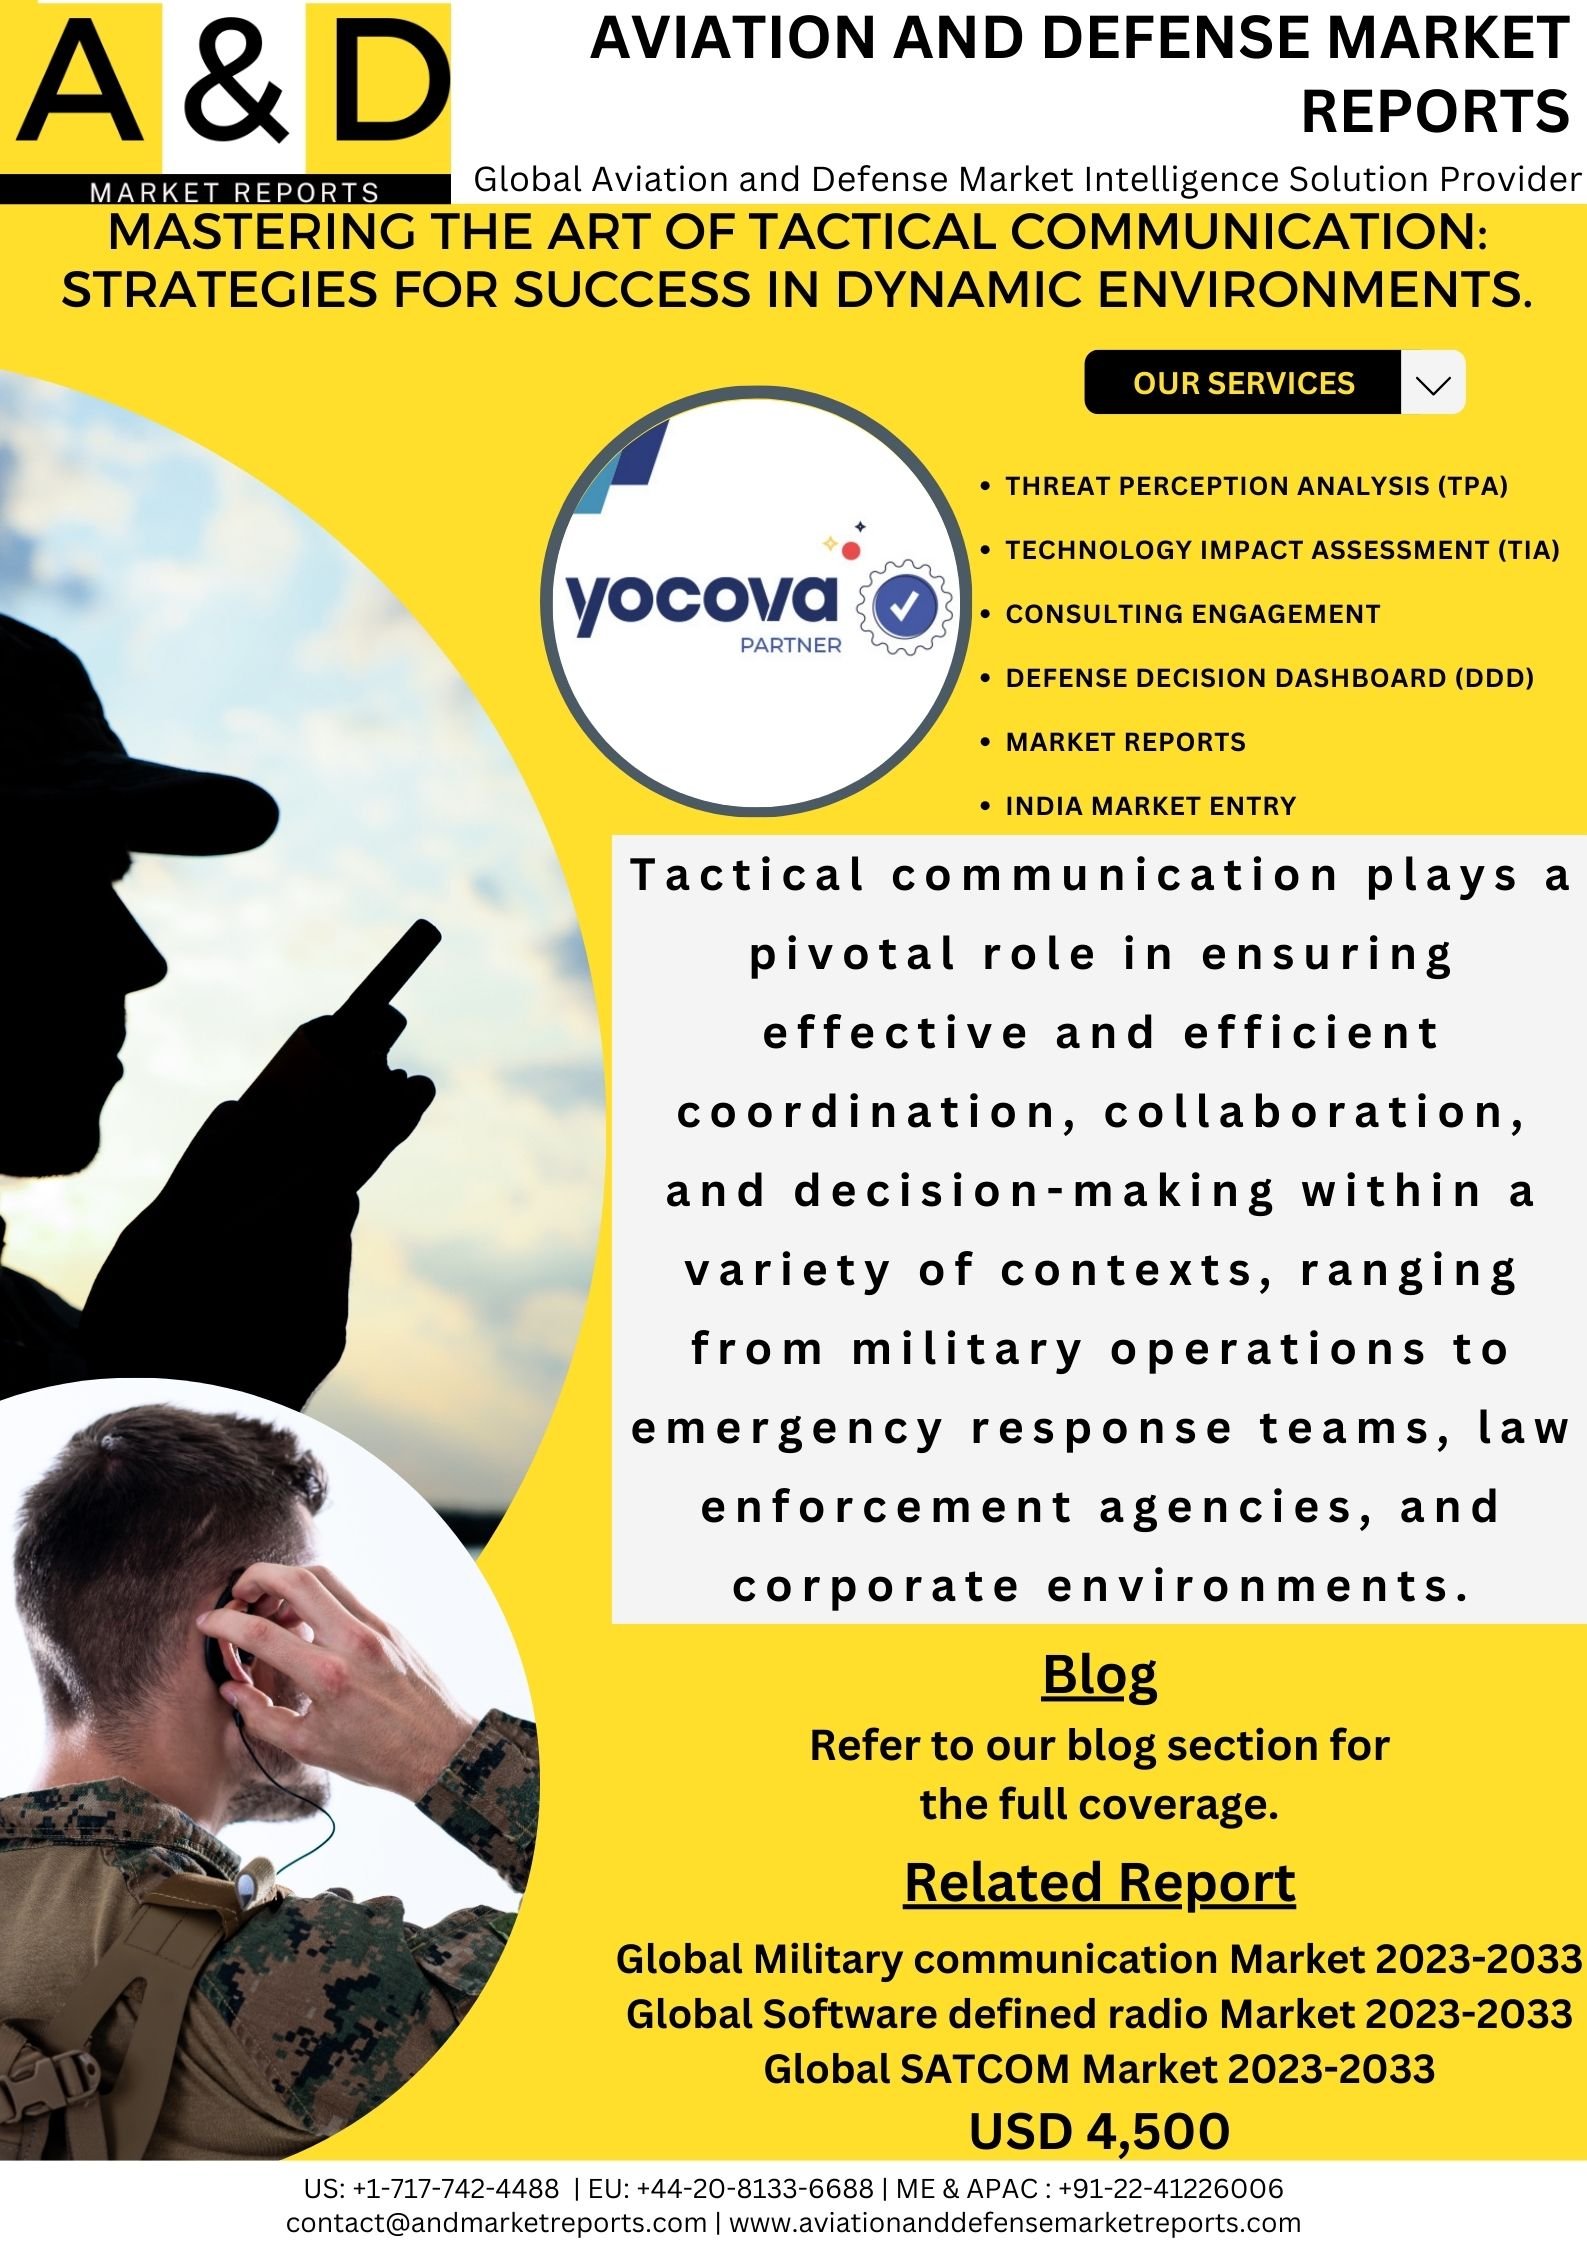 Mastering the Art of Tactical Communication: Strategies for Success in Dynamic Environments